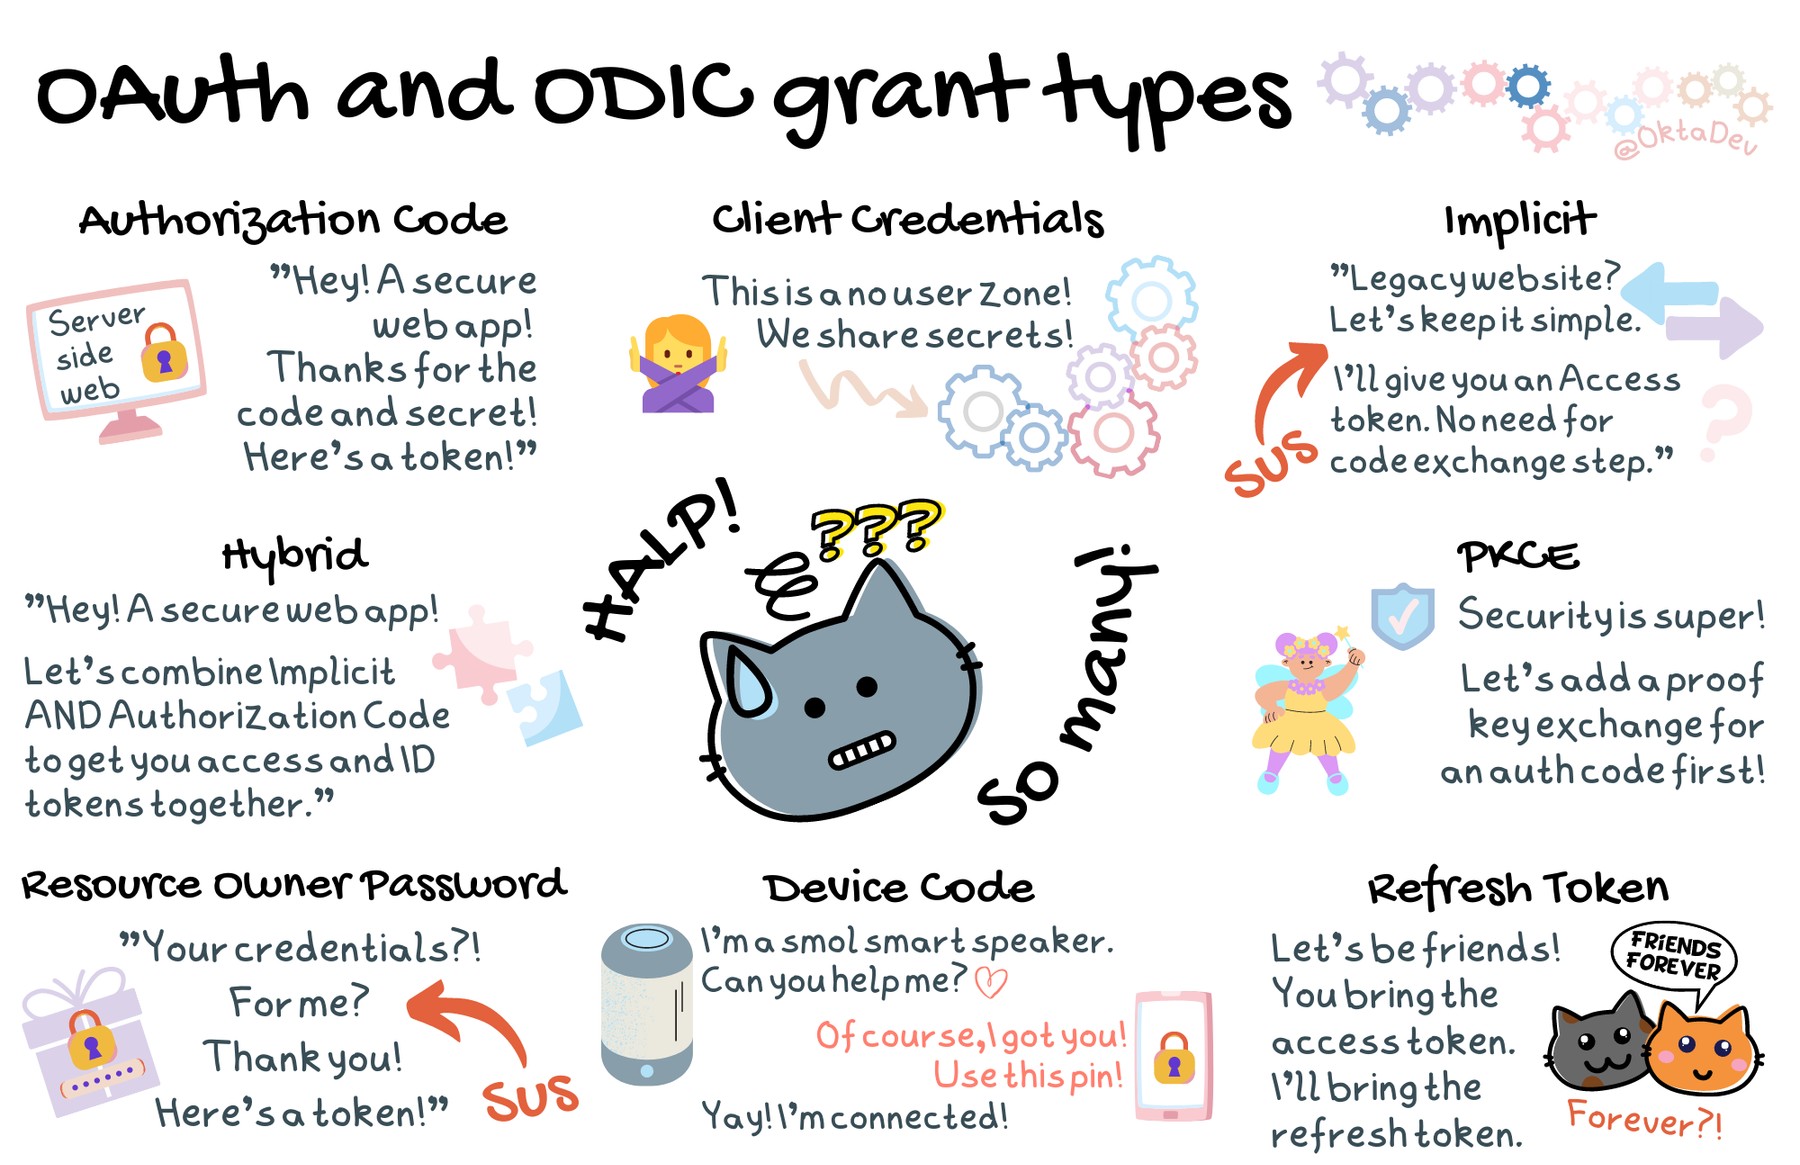 Graphical summarization of all the grant types